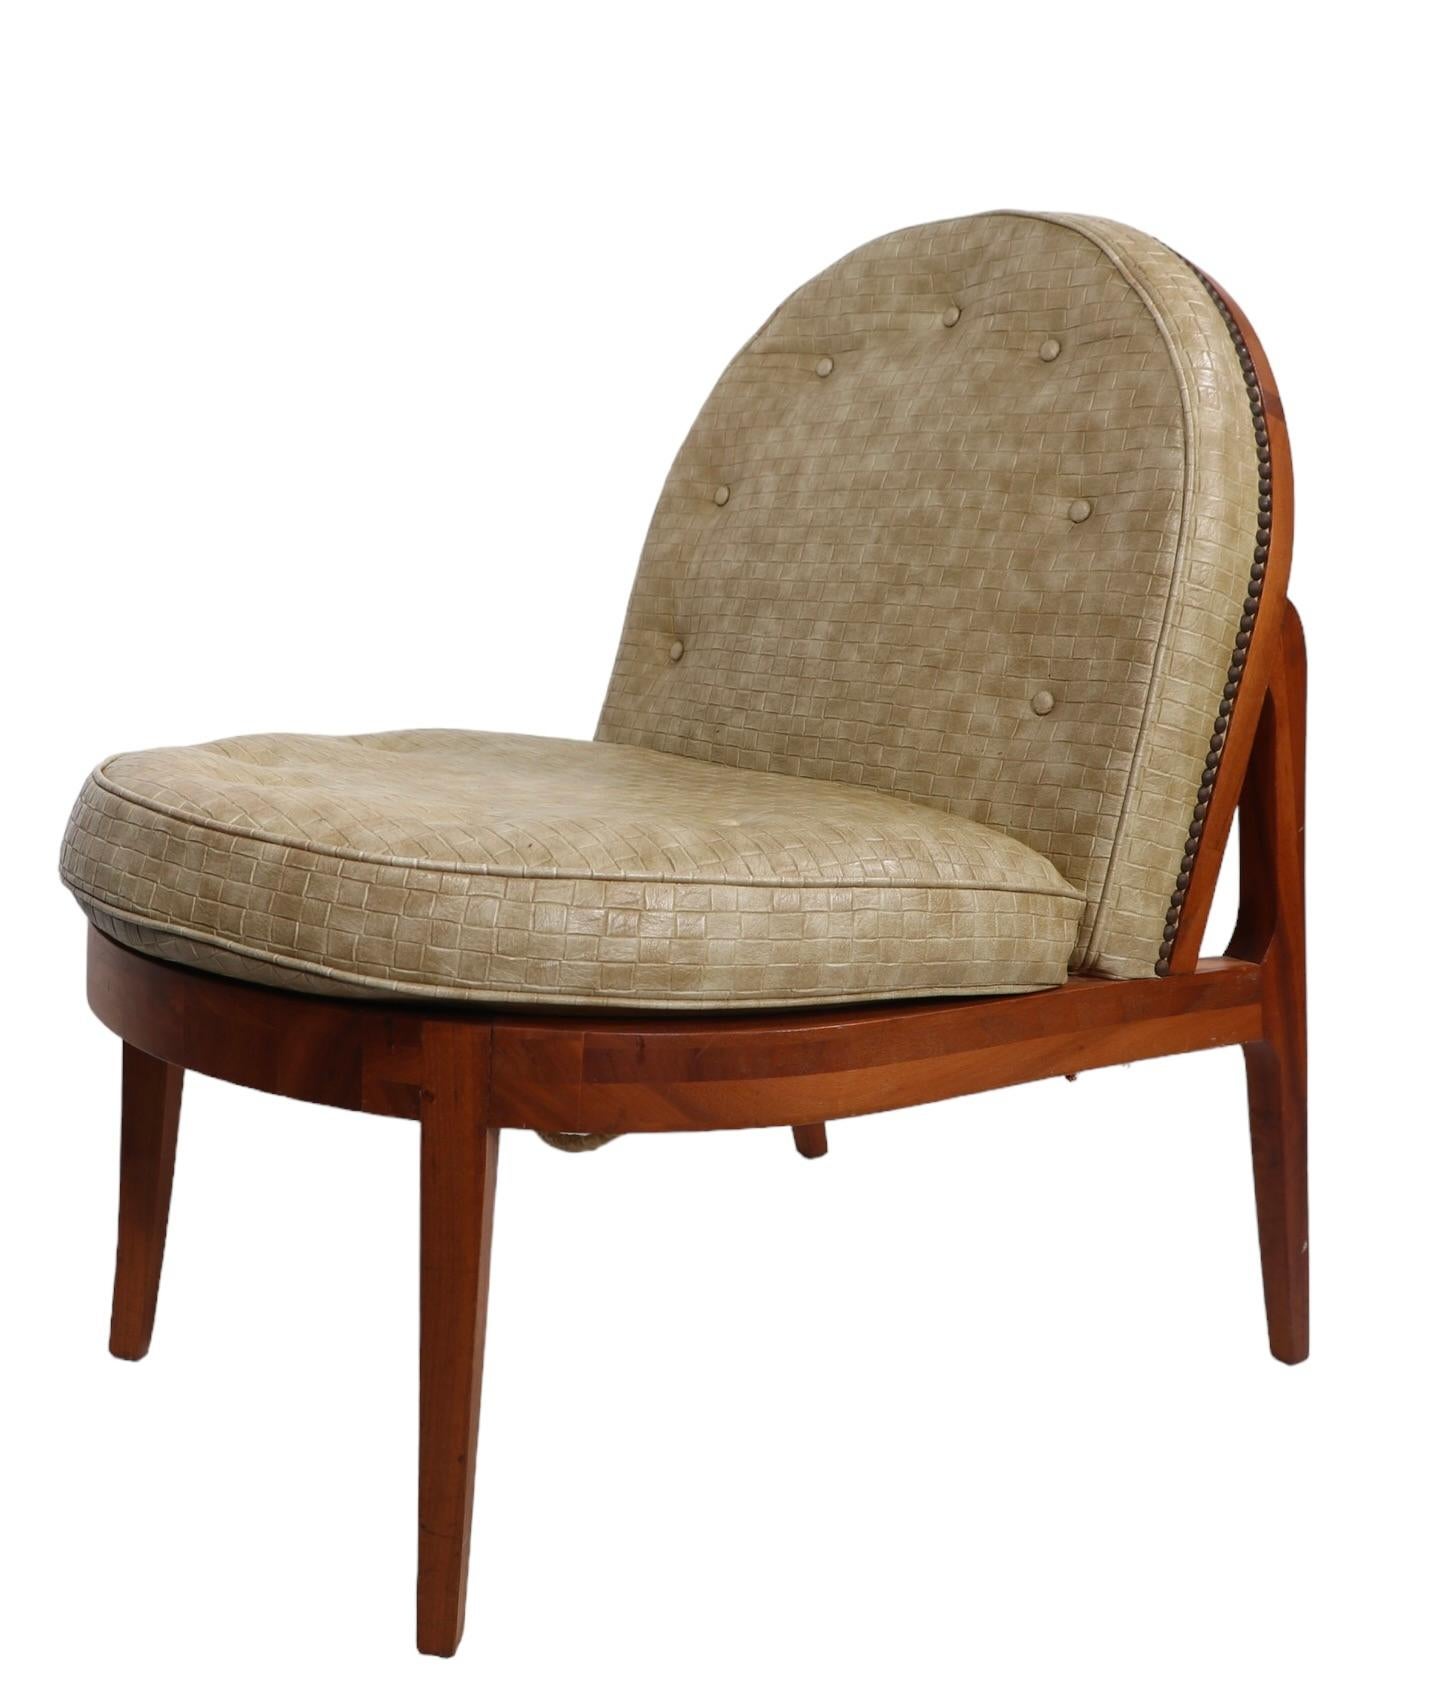 Mid Century Lounge Chair after Wormley c 1950's In Good Condition For Sale In New York, NY